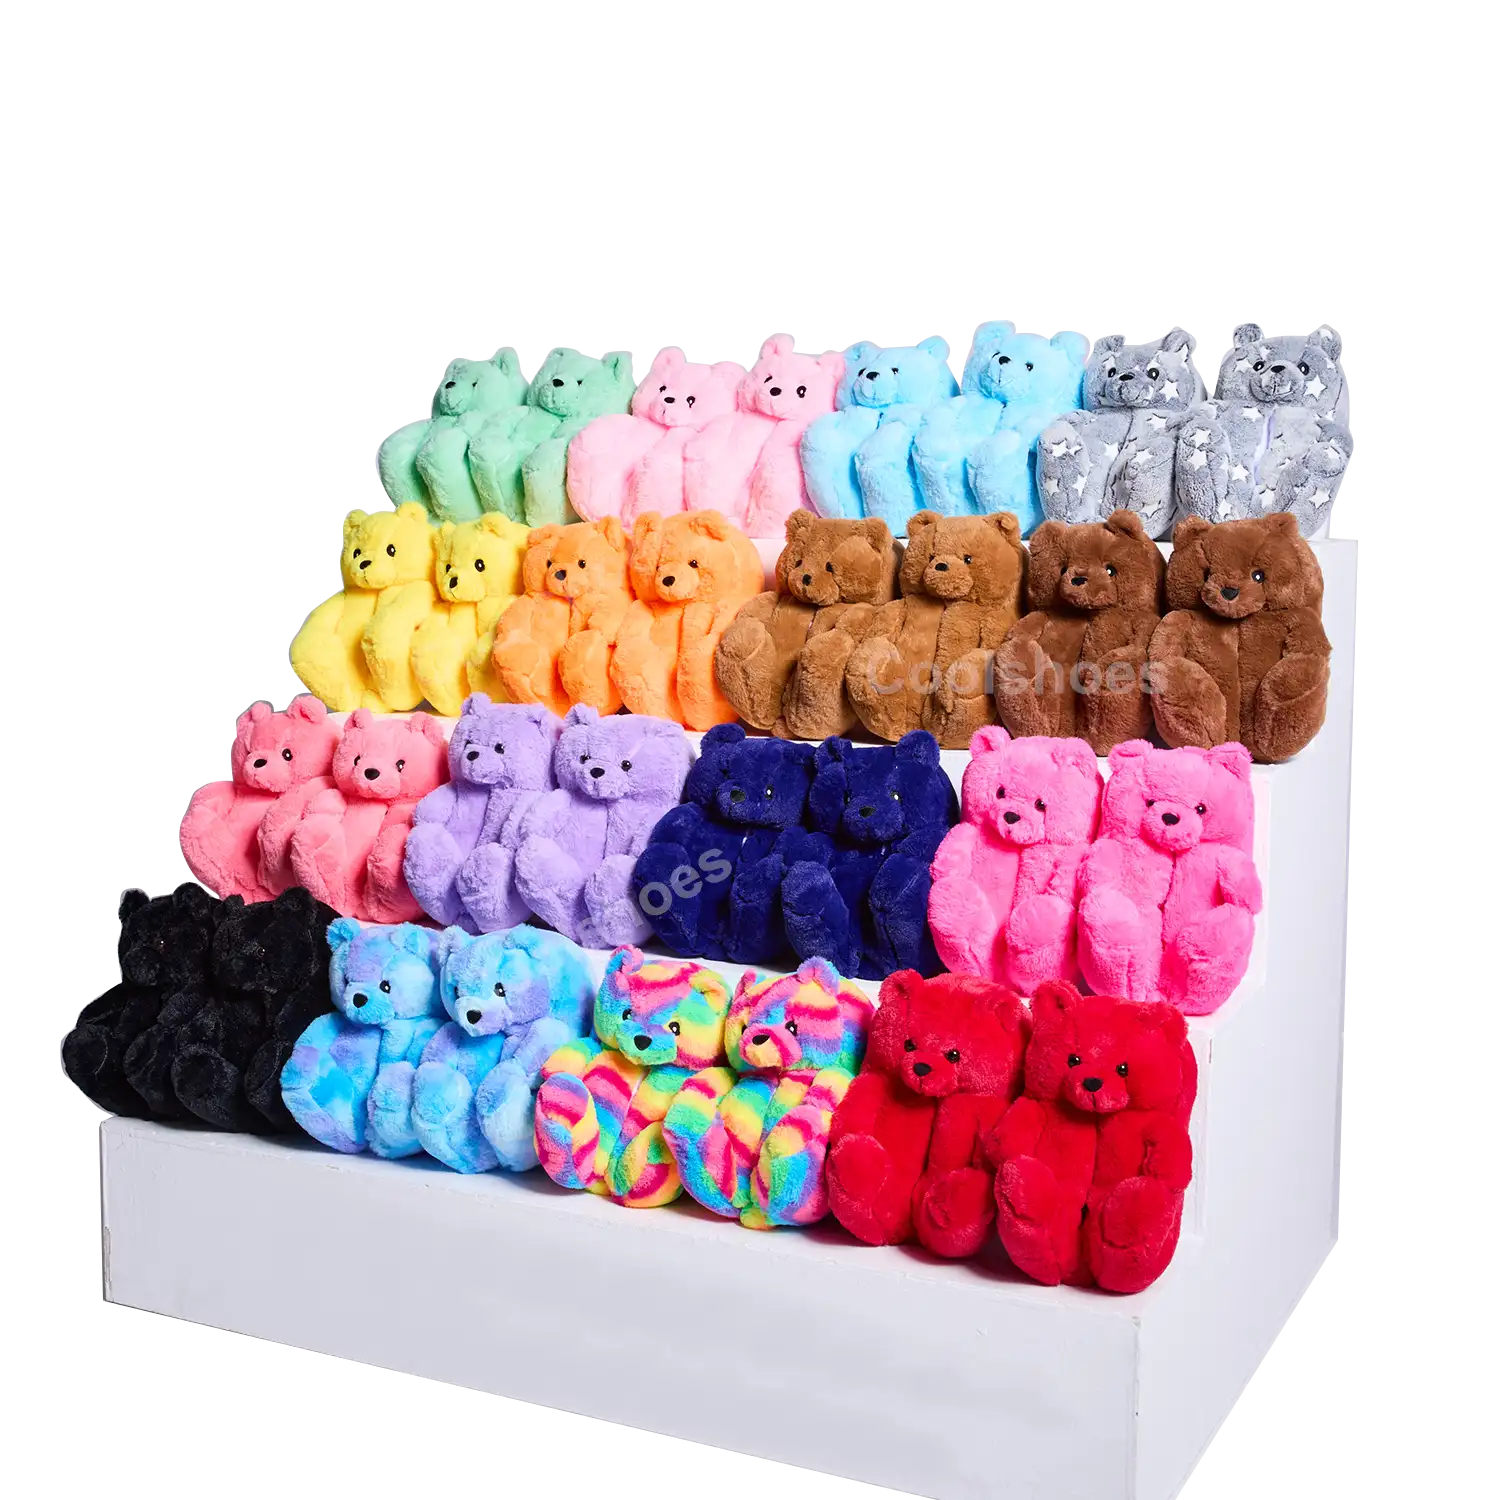 Drop Shopping Delivery House Plush Slipper animals glow in the dark Teddy Bear Slippers For Women Girls One Size Fit All